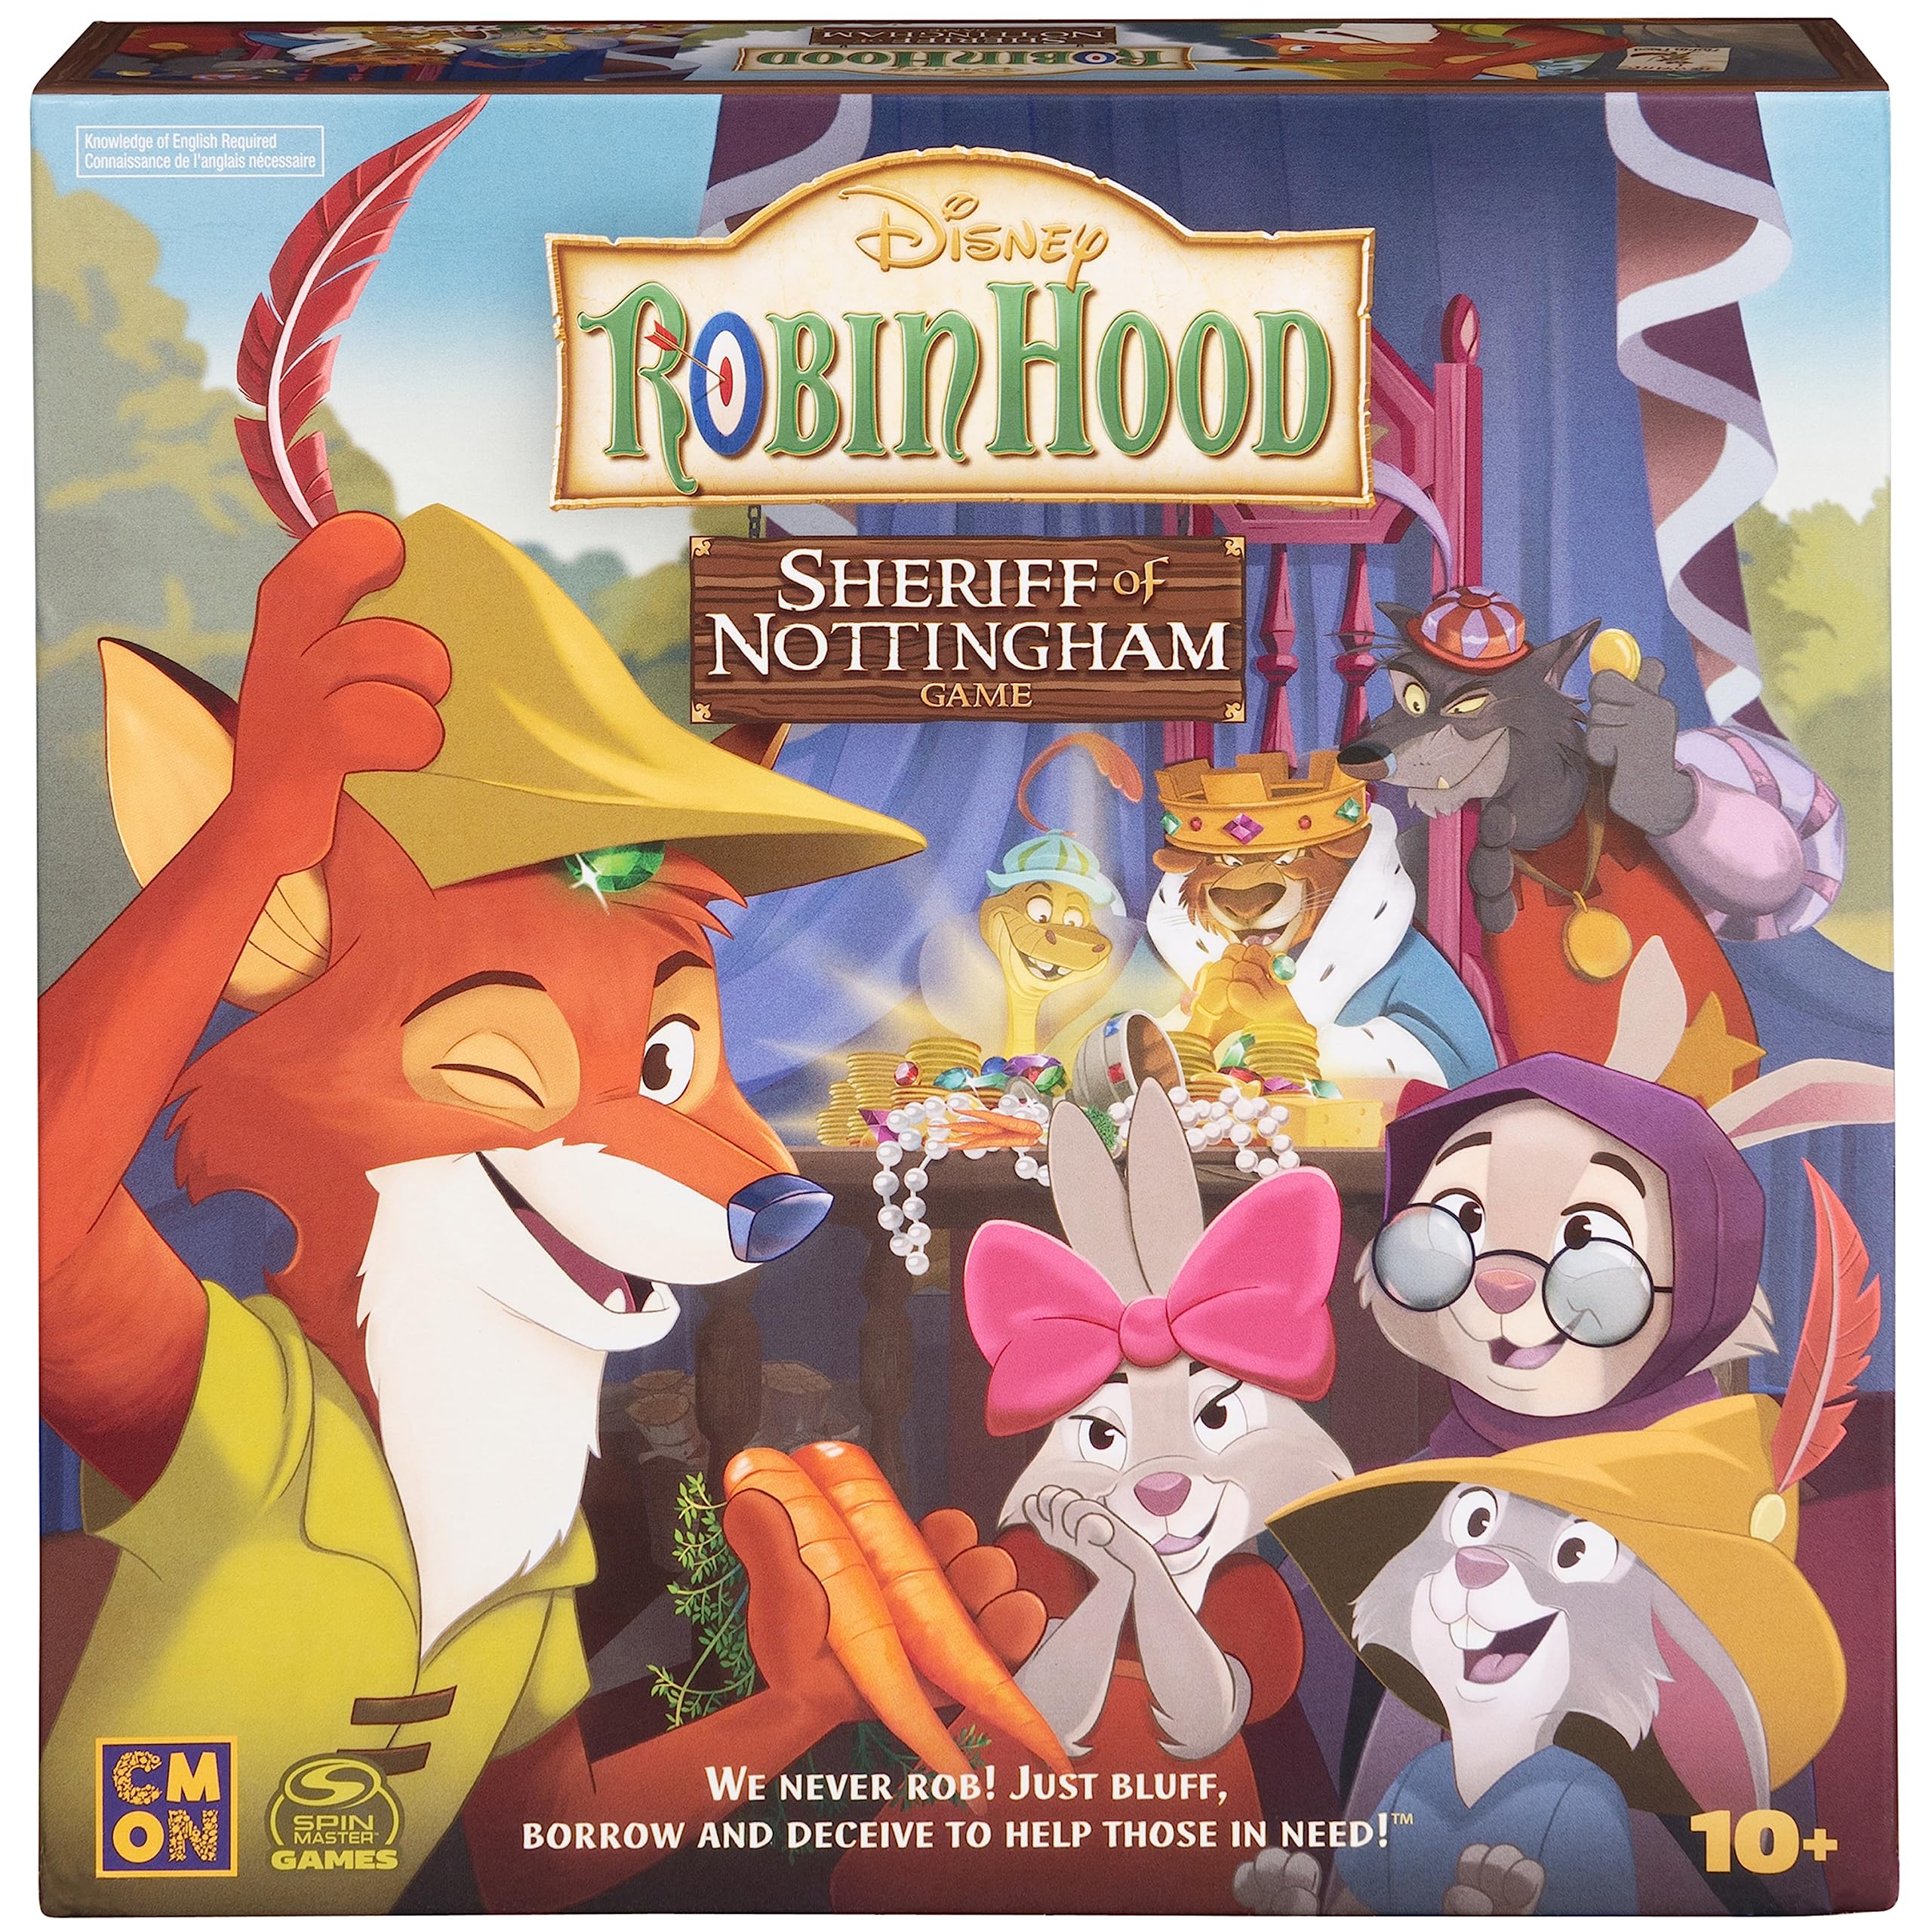 Disney Robin Hood Sheriff of Nottingham Game | Family Board Games | Disney Gifts | Board Games for Family Night, for Adults & Kids Ages 10 and up